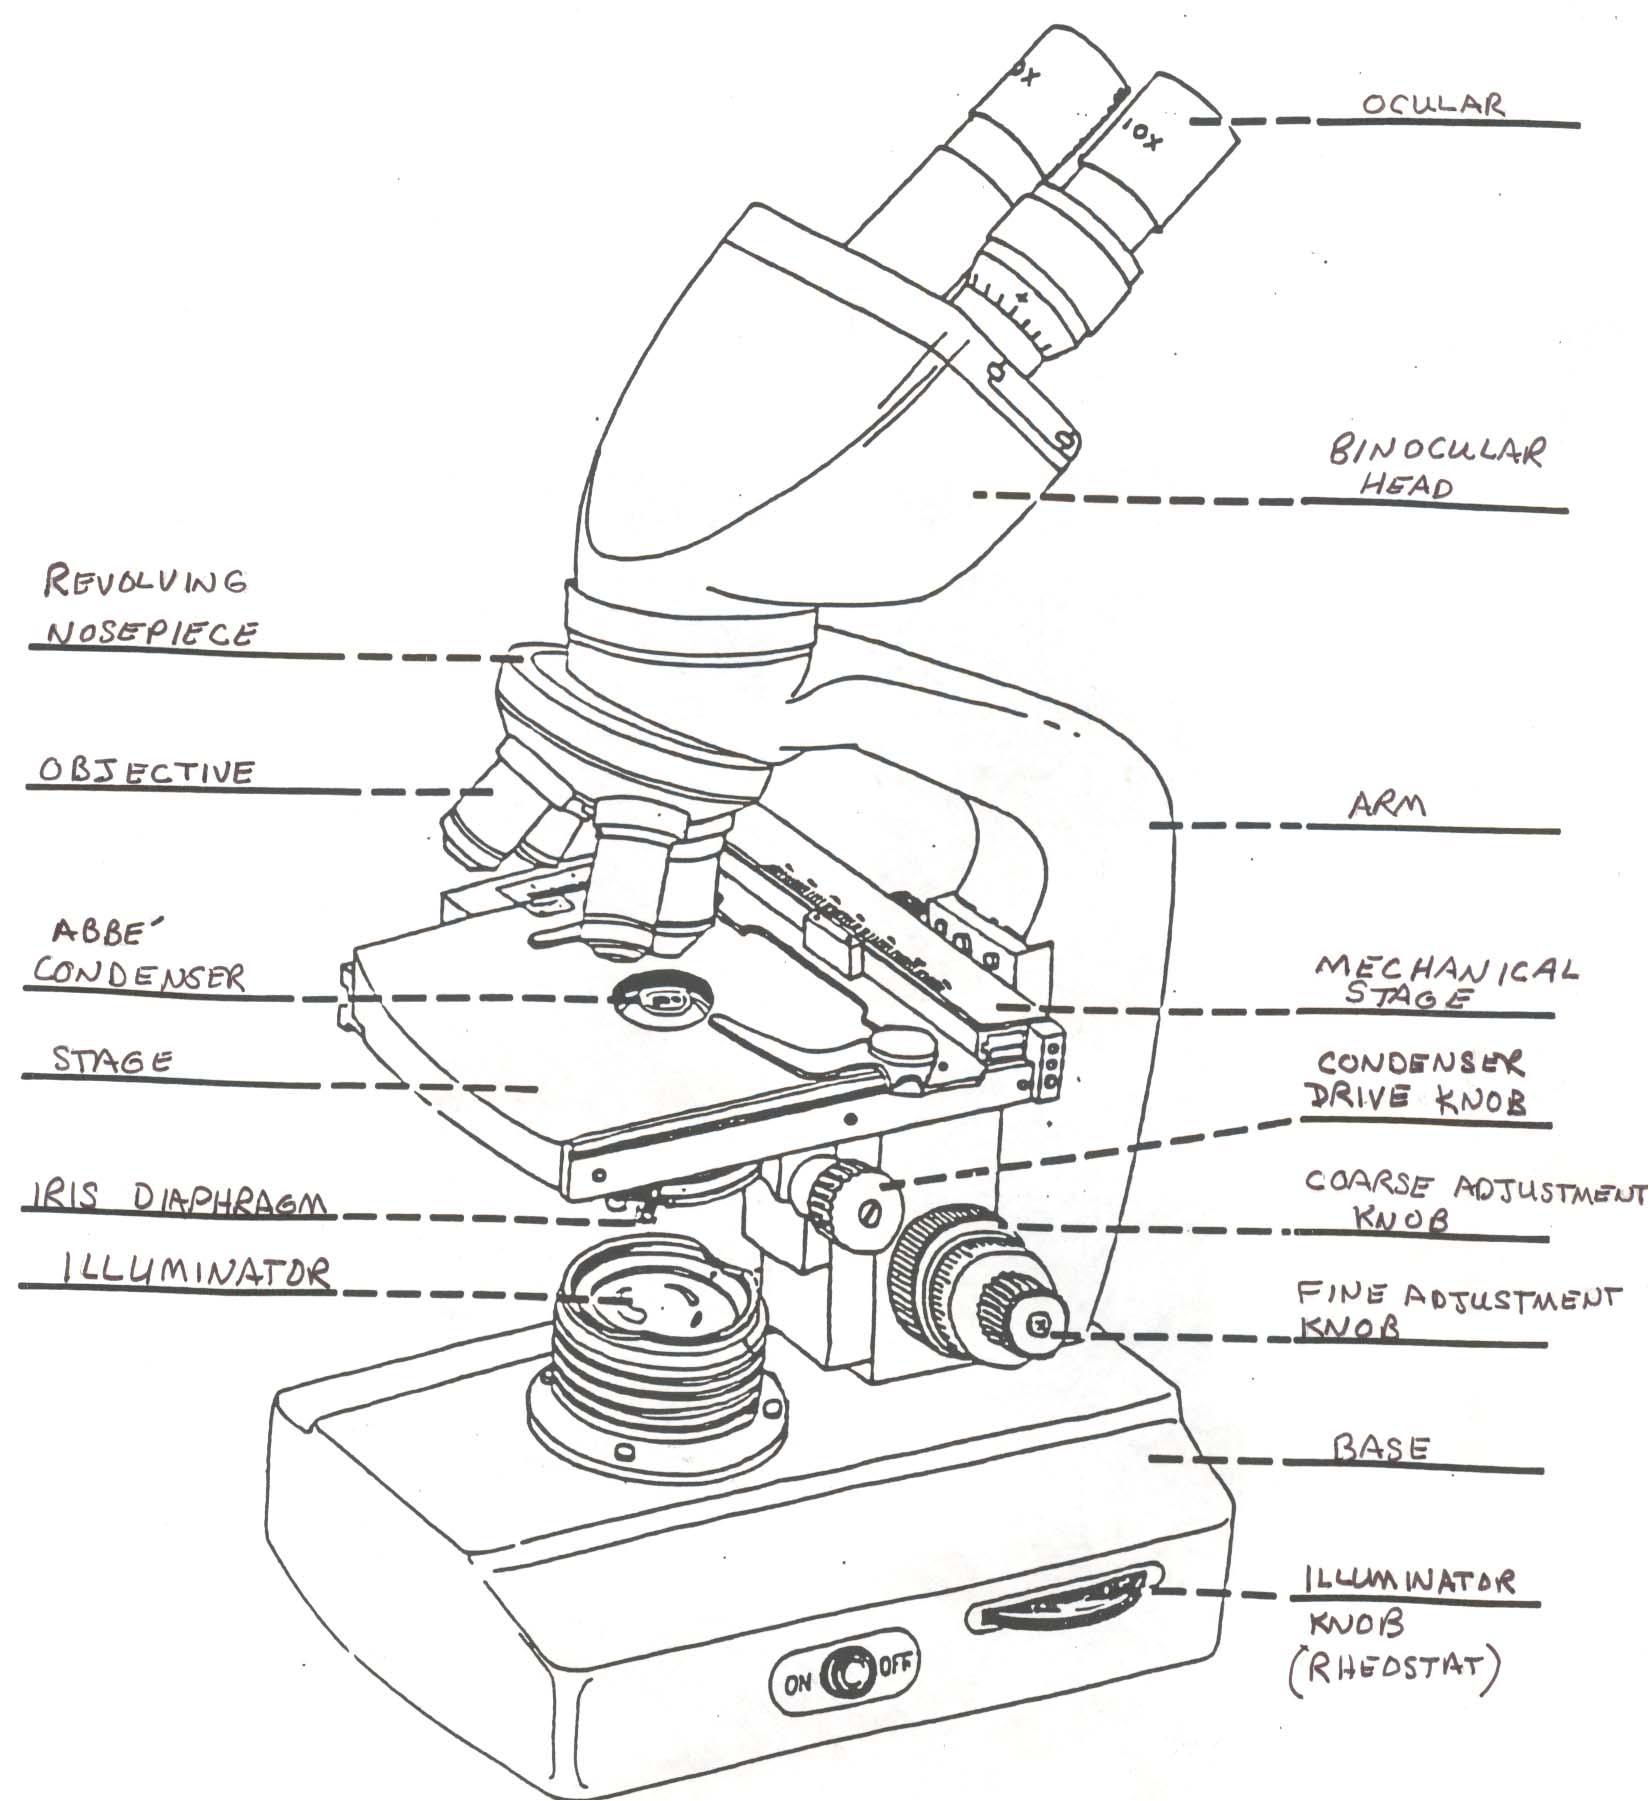 Microscope Drawing And Label at GetDrawings Free download